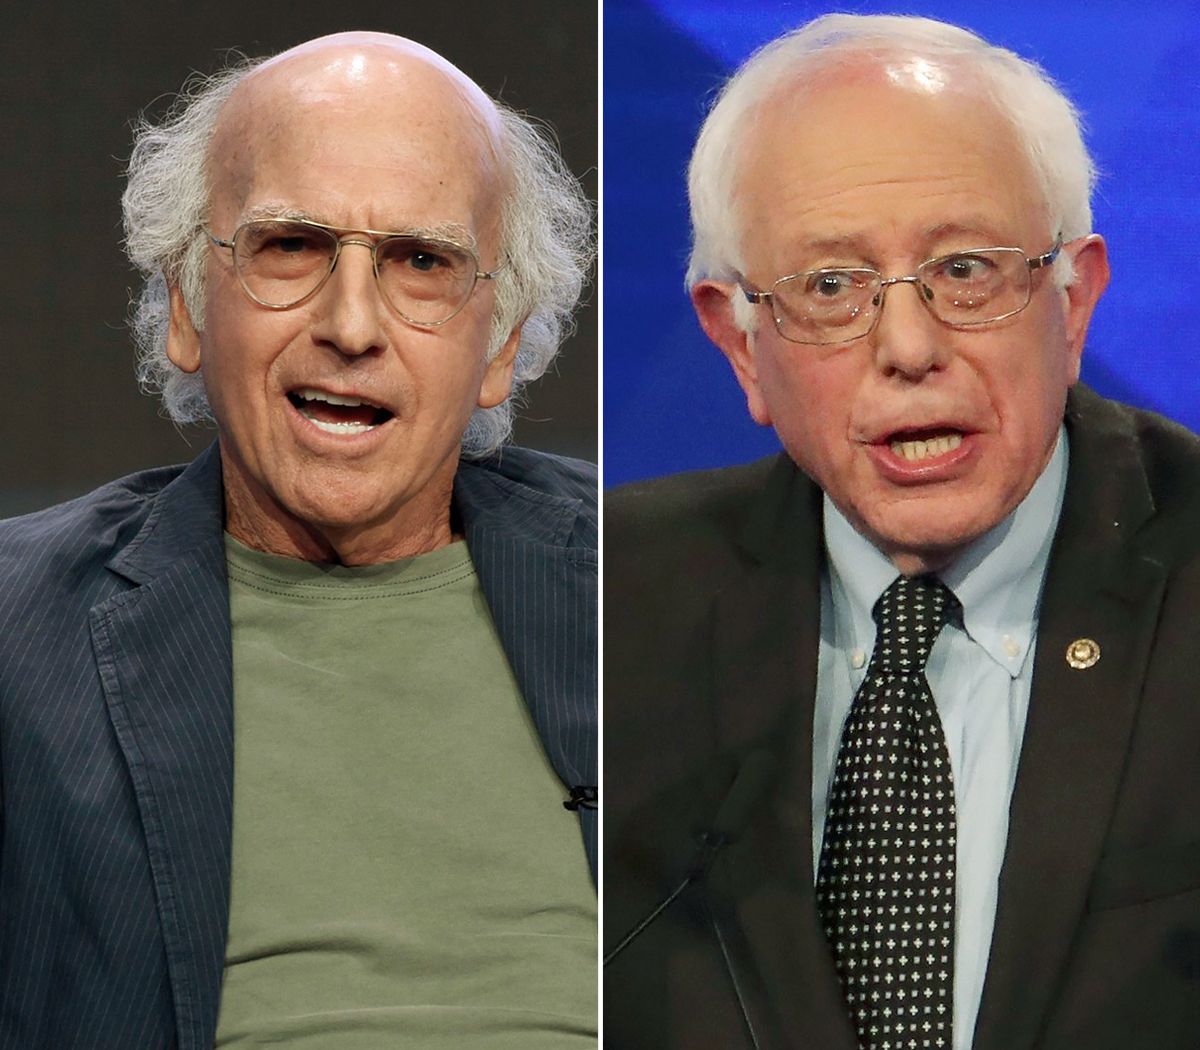 larry david and bernie sanders are related